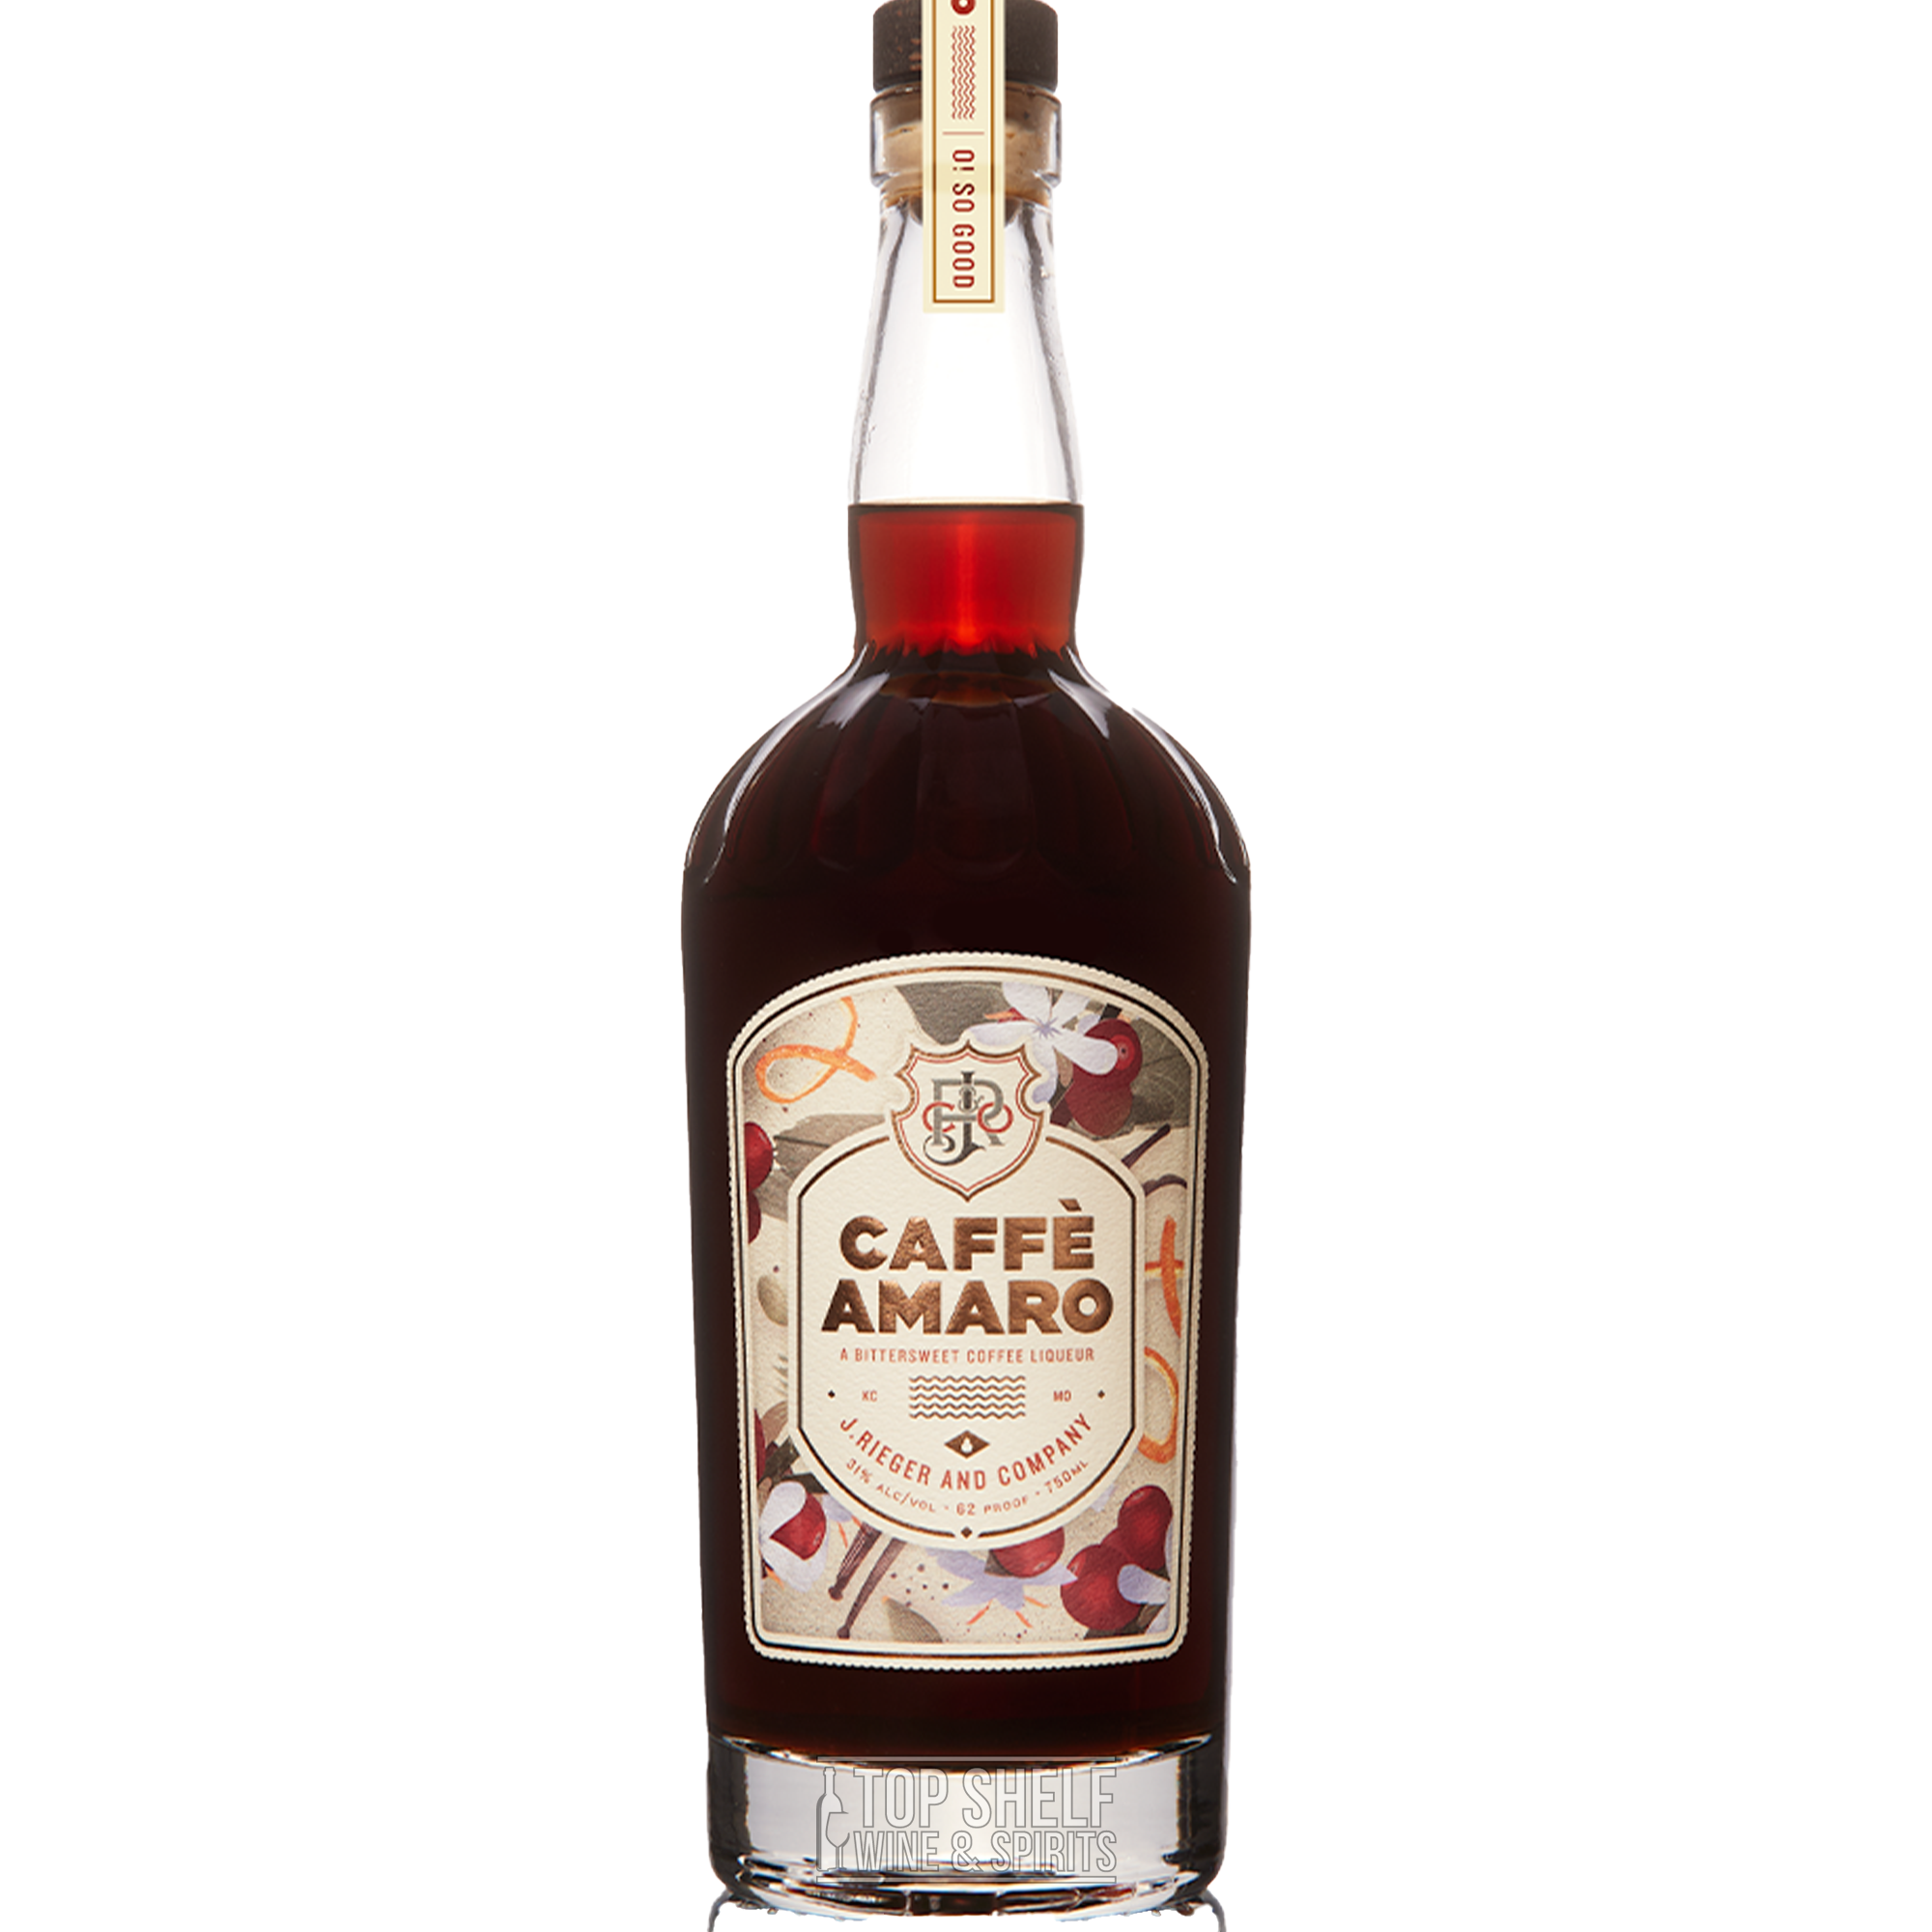 J. Rieger and Co. Caffe Amaro